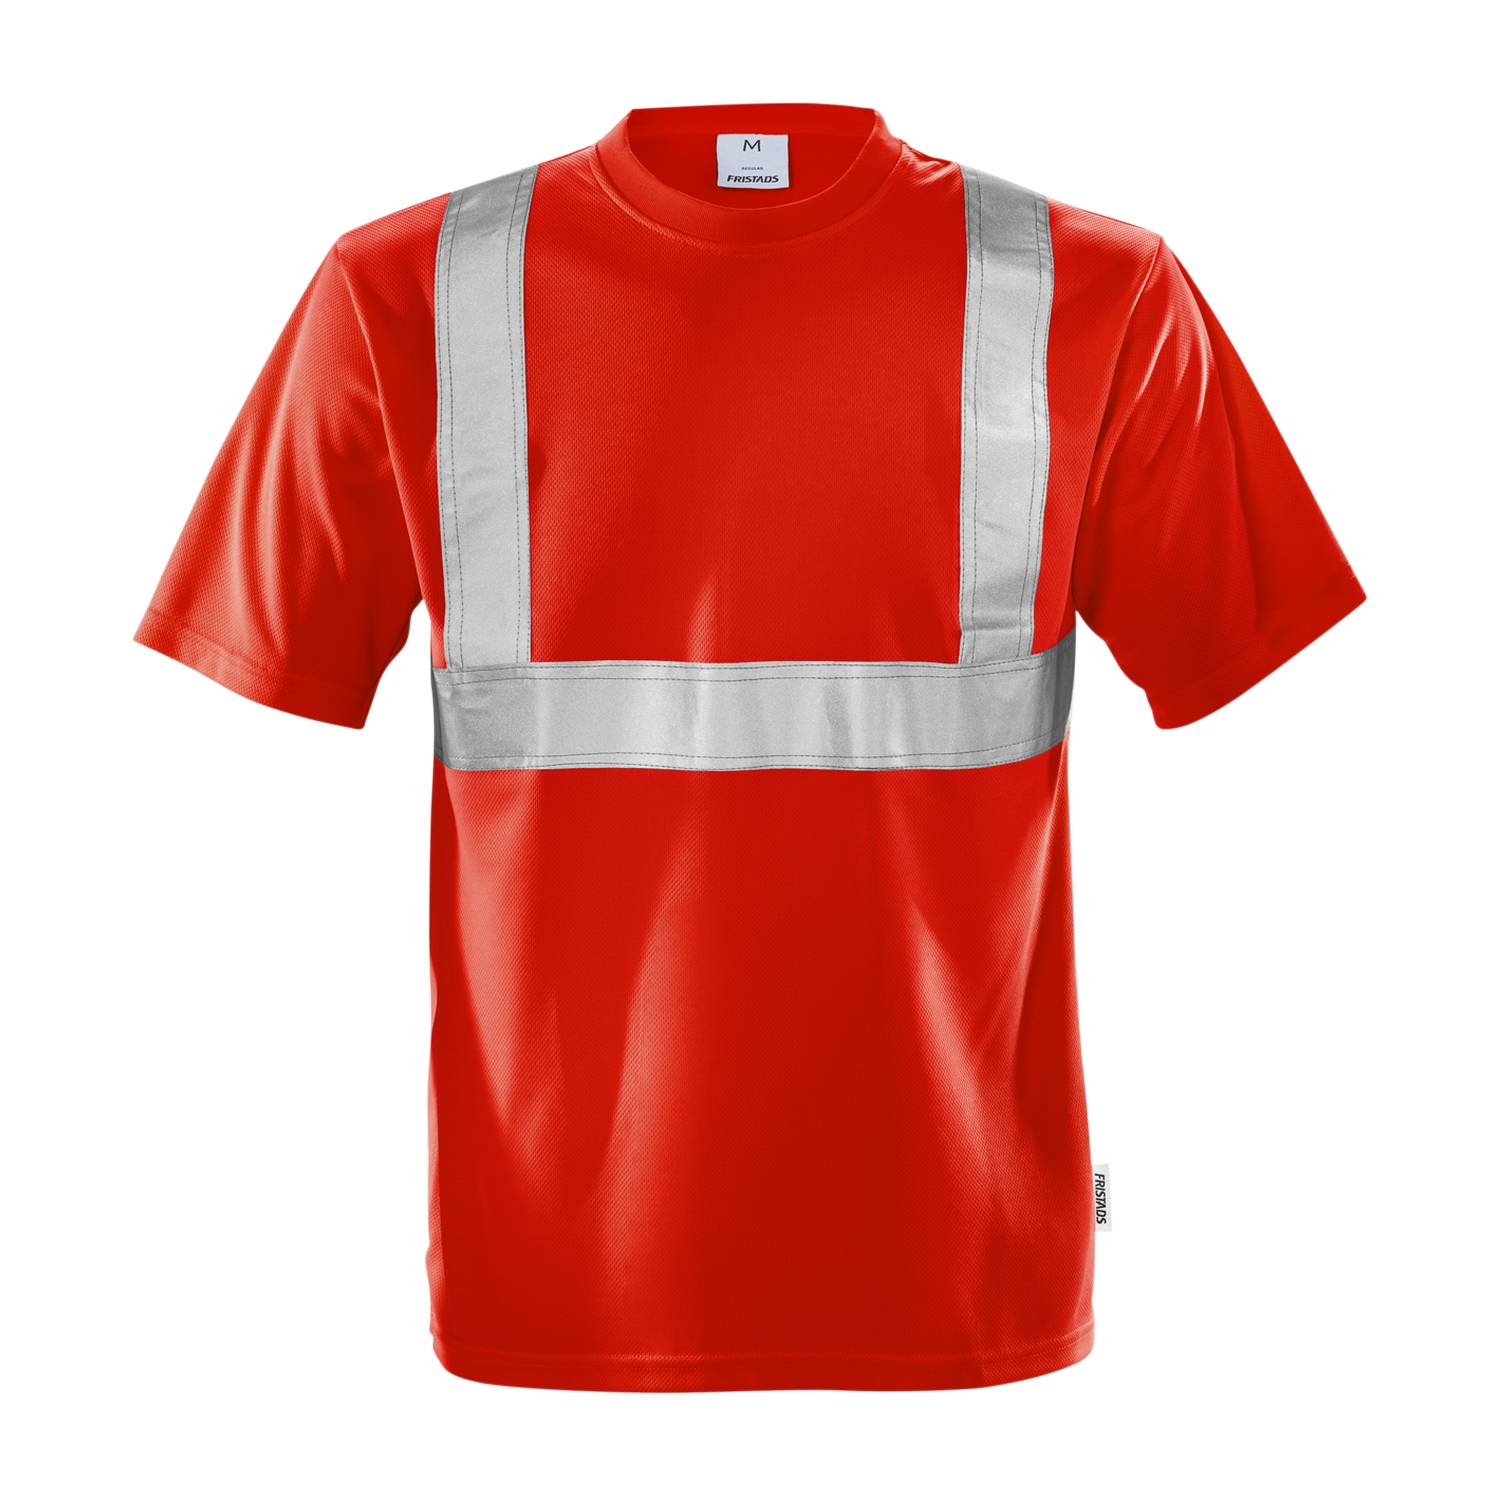 Fristads visokovidljiva majica 101010-330: High vis t-shirt class 2 7411 TP-101010-330 Rib-knit neck / 2-needle stitches on reflective tape / Approved according to EN ISO 20471 class 2 / Approved after 25 washes / OEKO-TEX certified. Materijal: 100% Polyester. Težina: 180 grama Certifikat: link